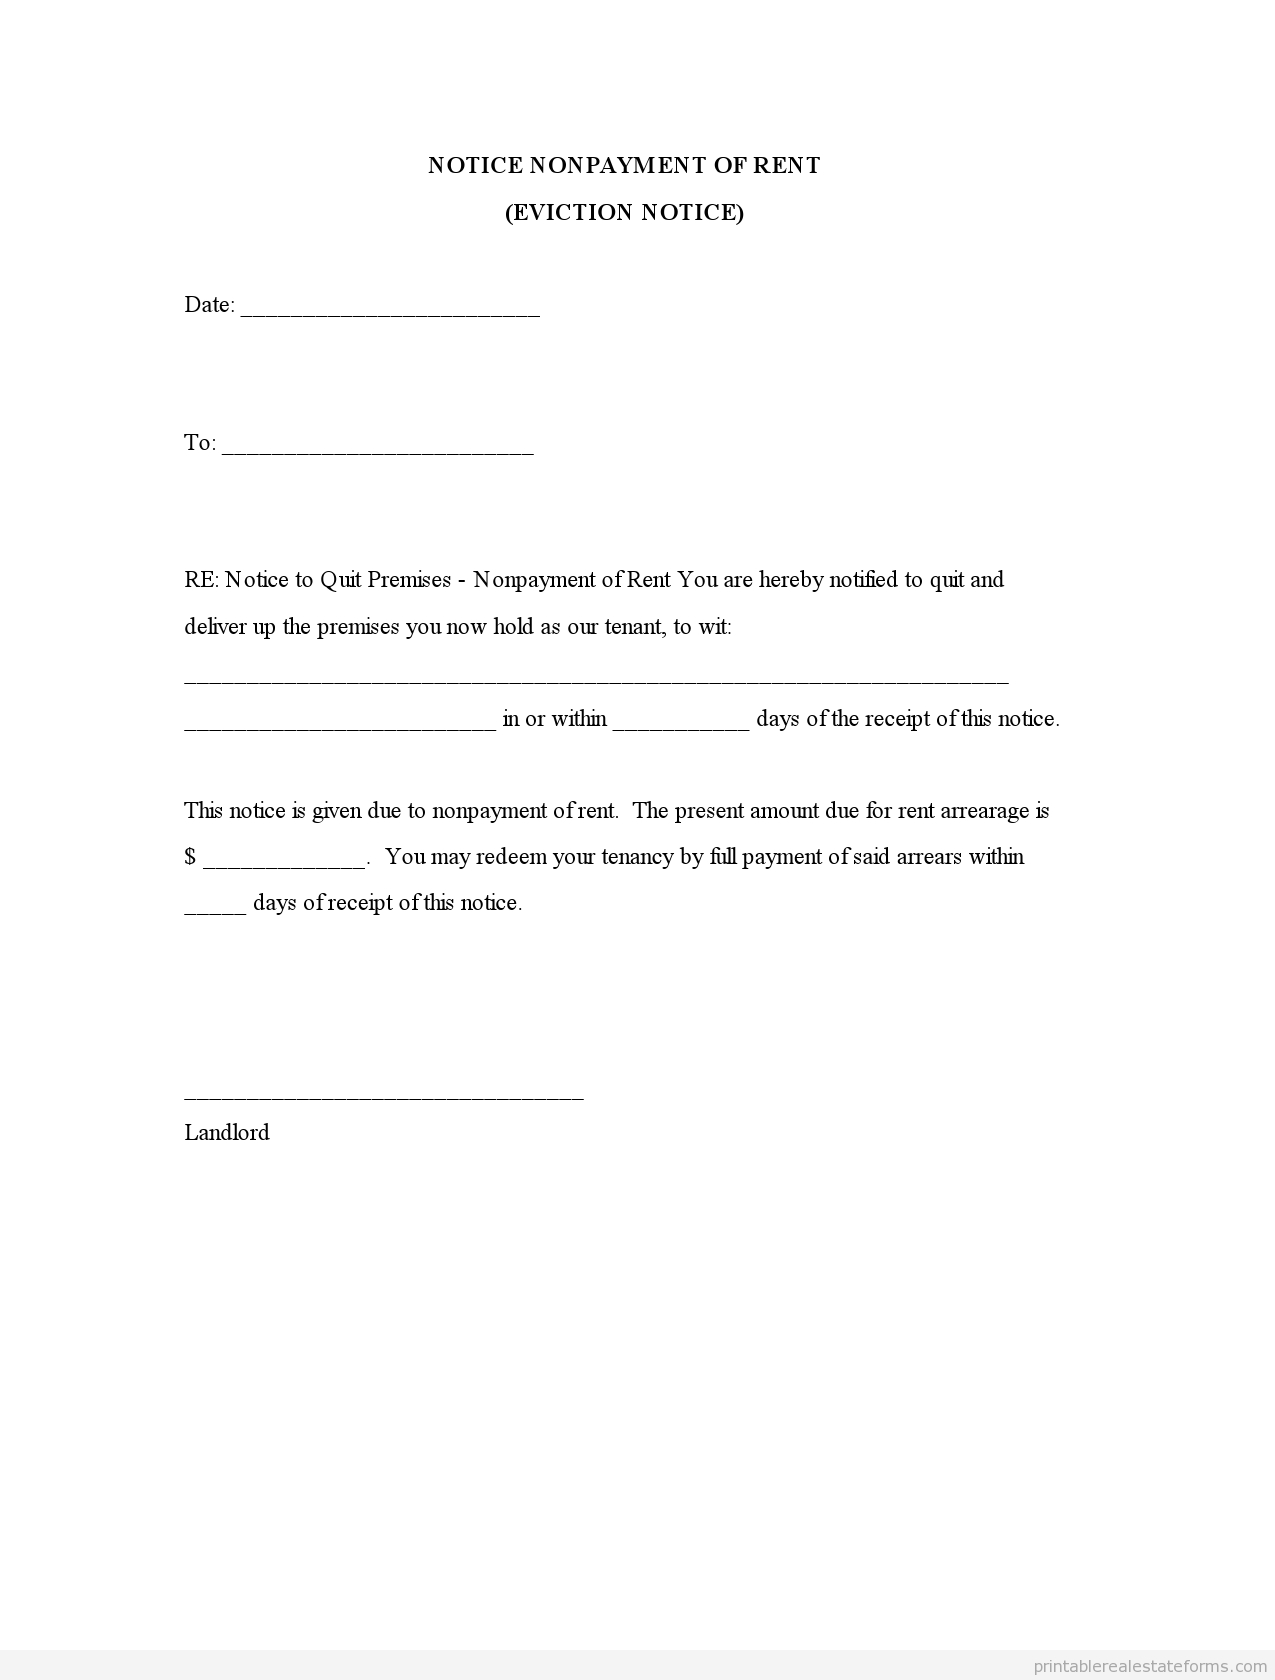 Free Printable Eviction Notice | Free Notice Nonpayment Of Rent Form - Free Printable Eviction Notice